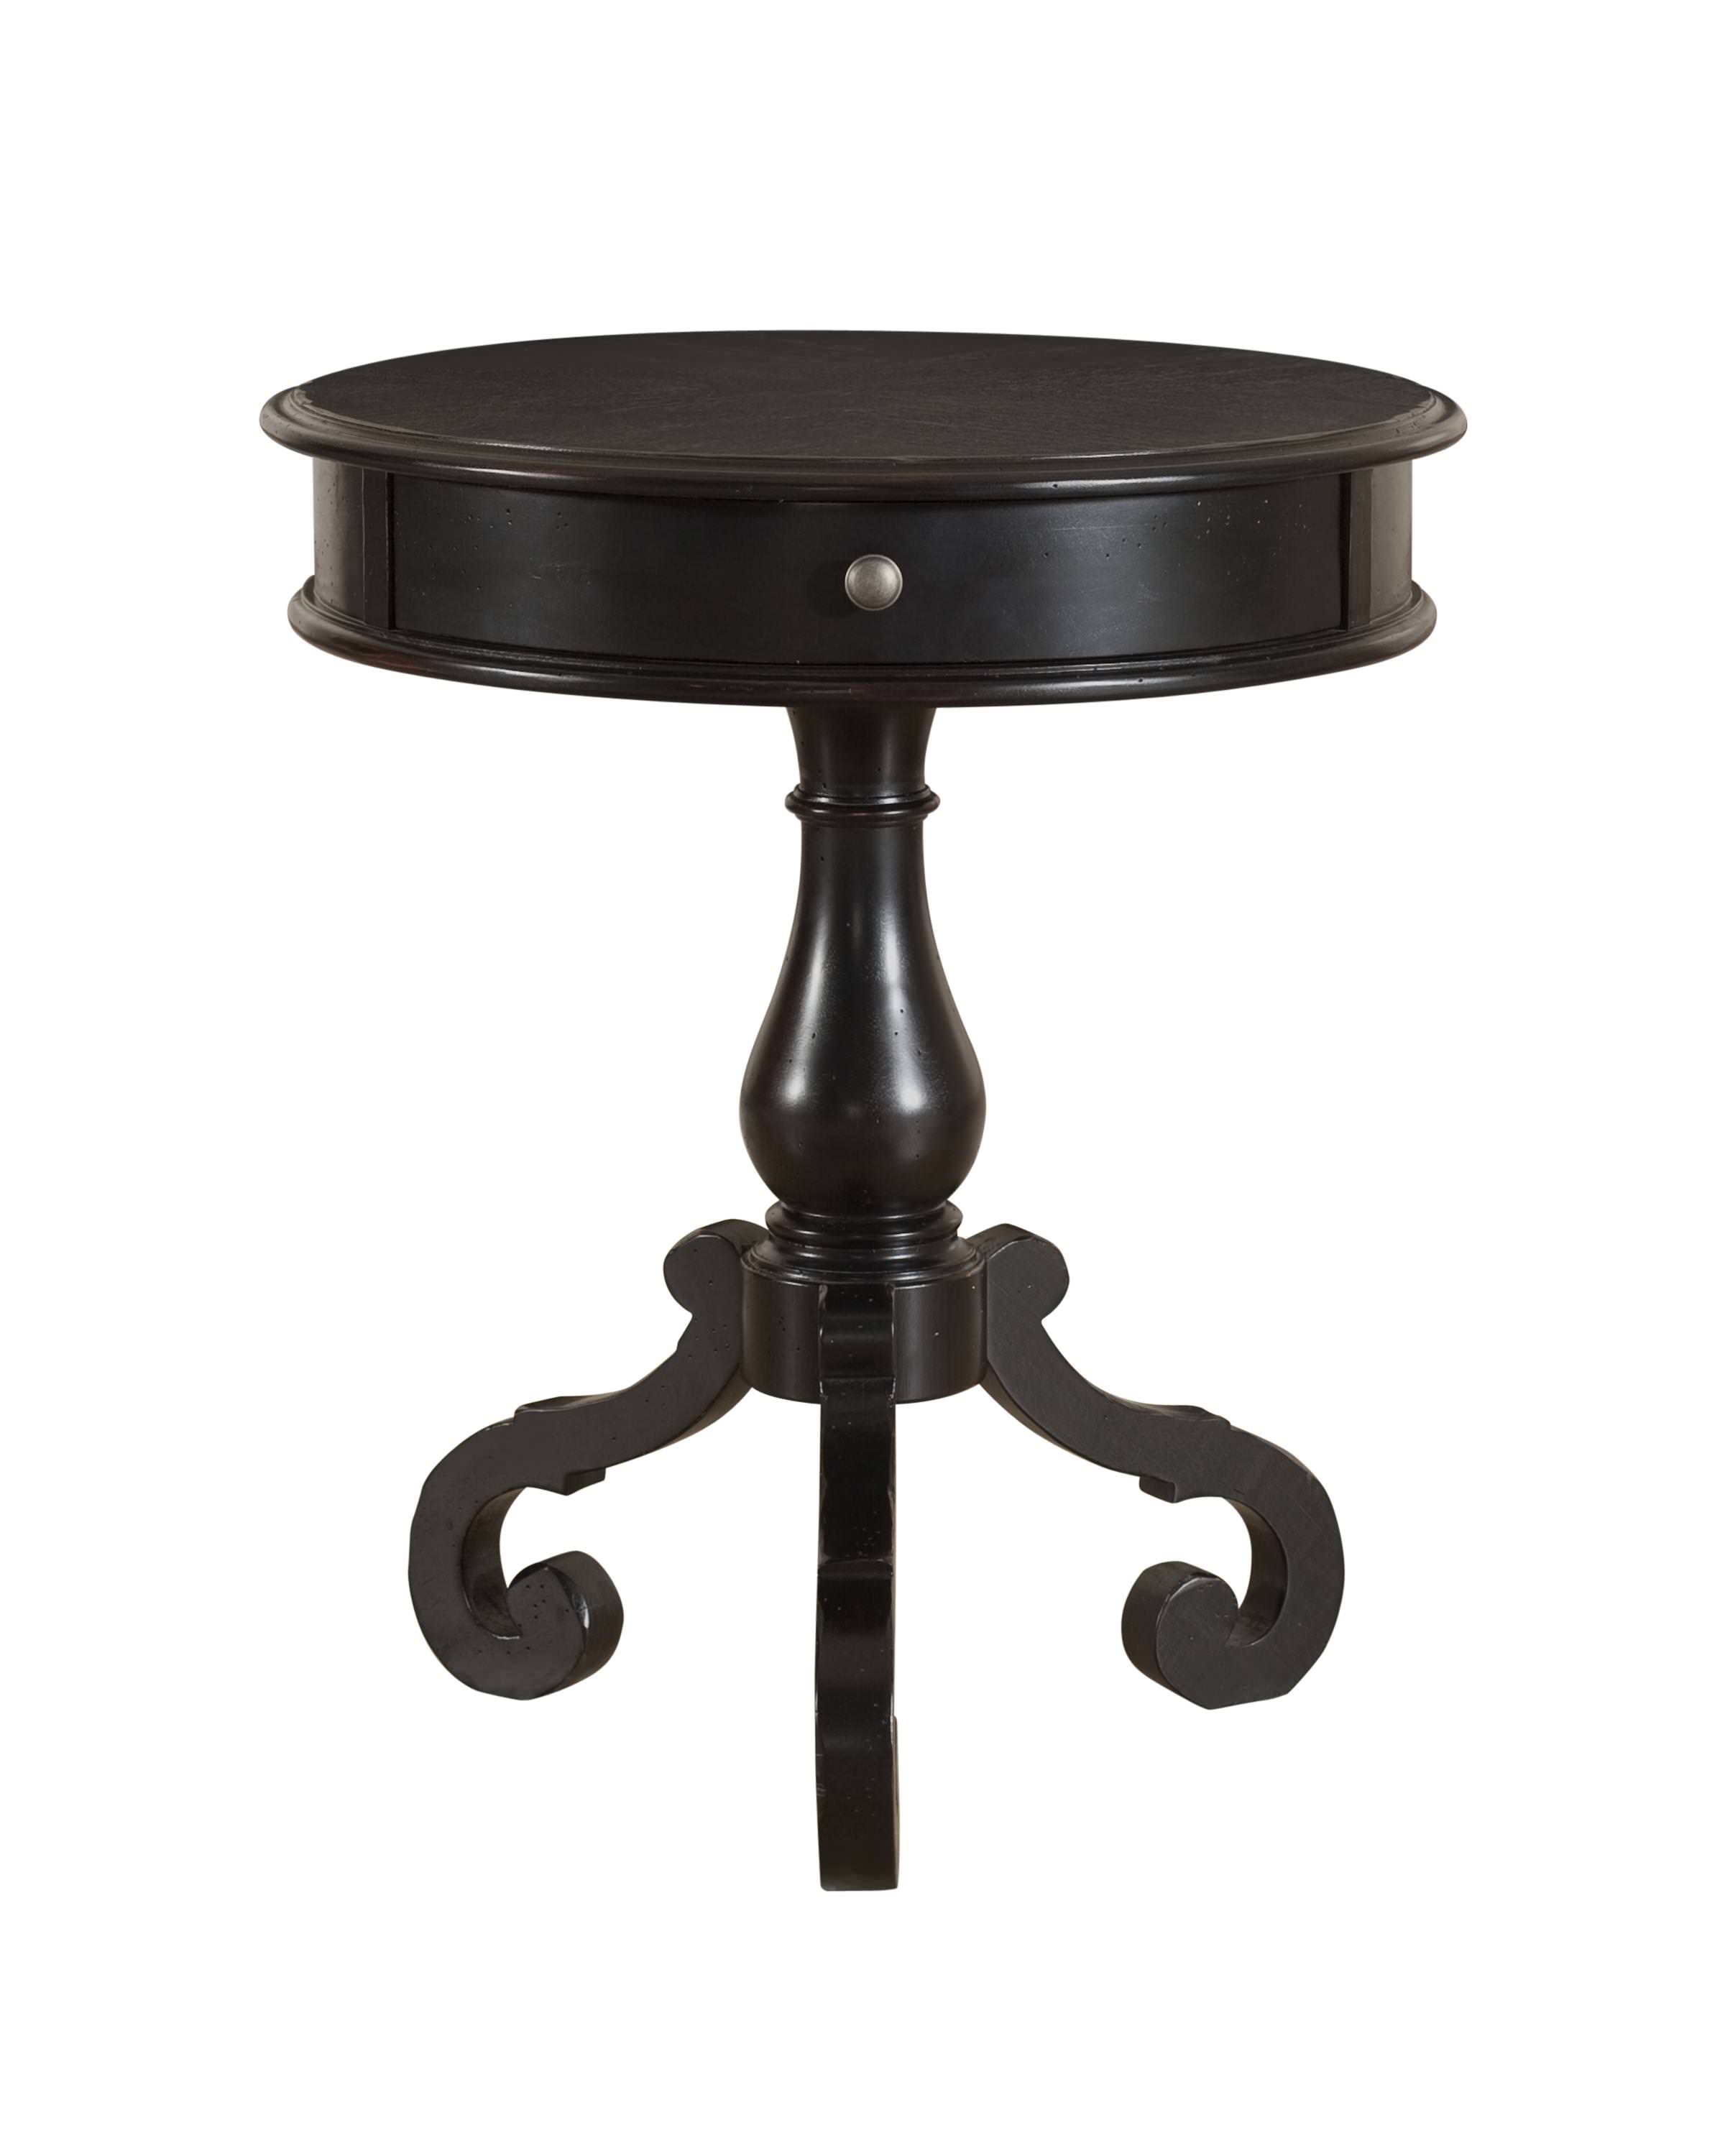 build pedestal accent table khandzoo home decor great black target standing lamp pottery barn graphers floor pool lounge chairs bunnings console with baskets wicker drawers thin